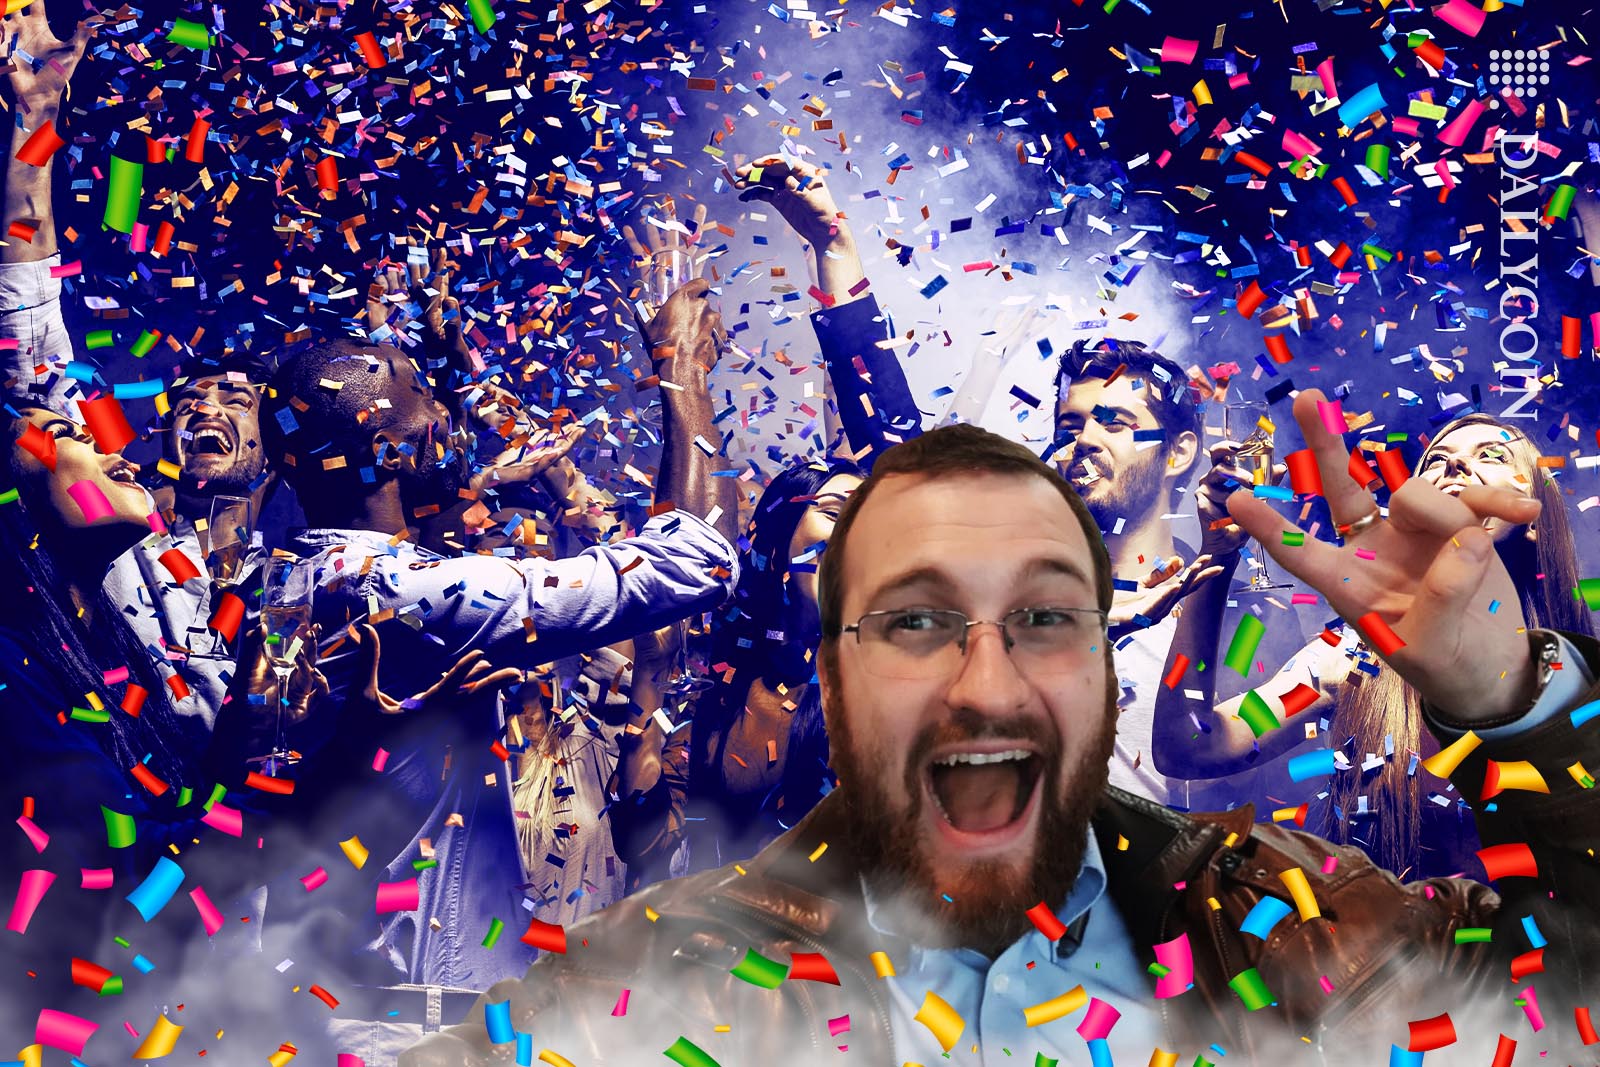 Charles Hoskinson is ecstatic, celebrating with a crowd of people in a downpoor of confetti.